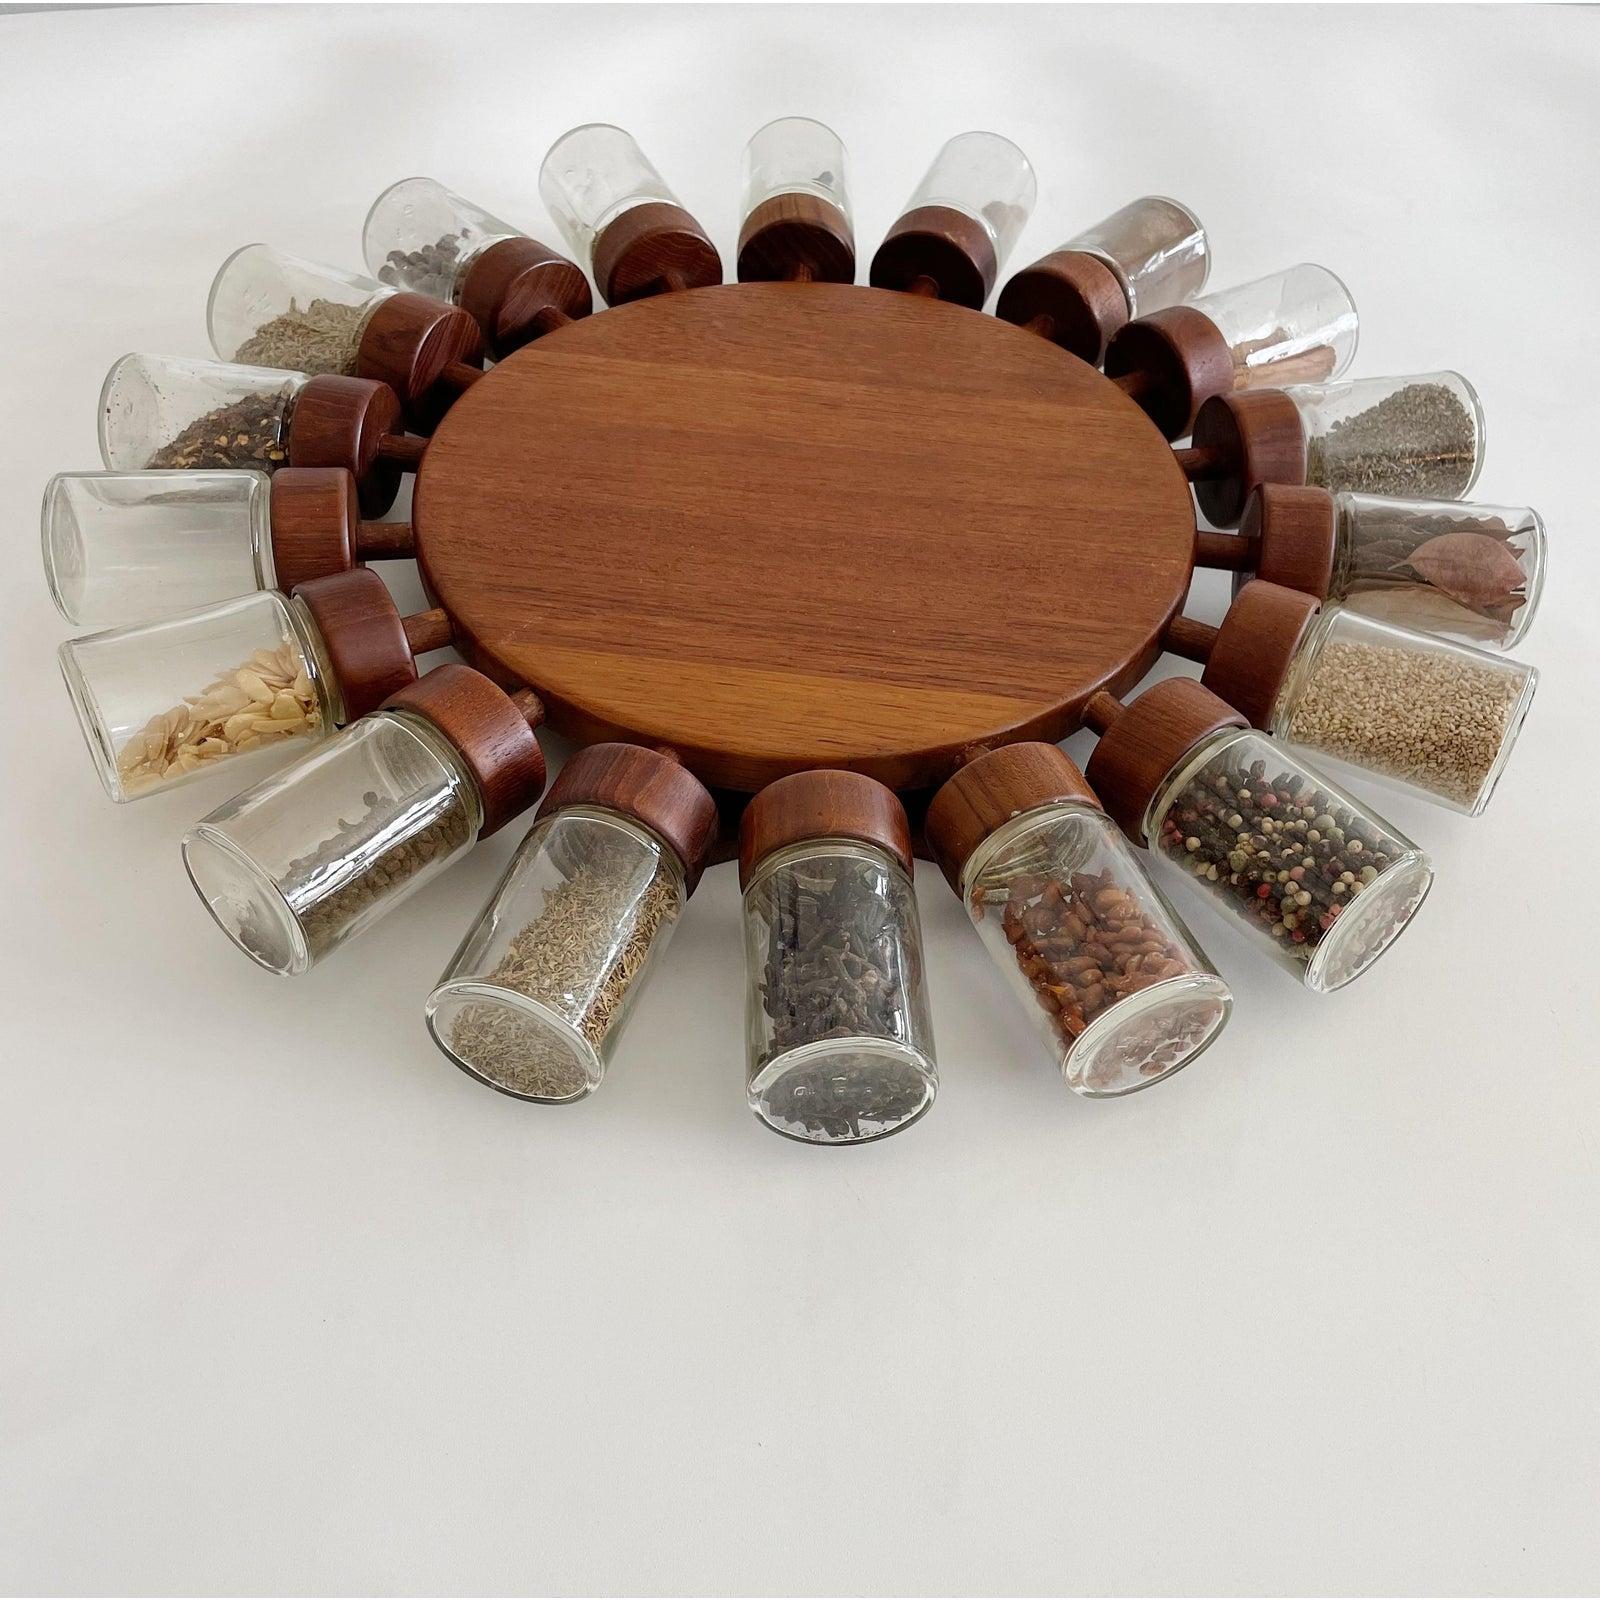 Designed to hang on the wall this rotating spice rack spins to the spice you need then just unscrew the glass jar and voila, you have your spices. Made in 1964 by Digsmed of Denmark, with 18 glass spice jars on a teak frame. This is the largest most